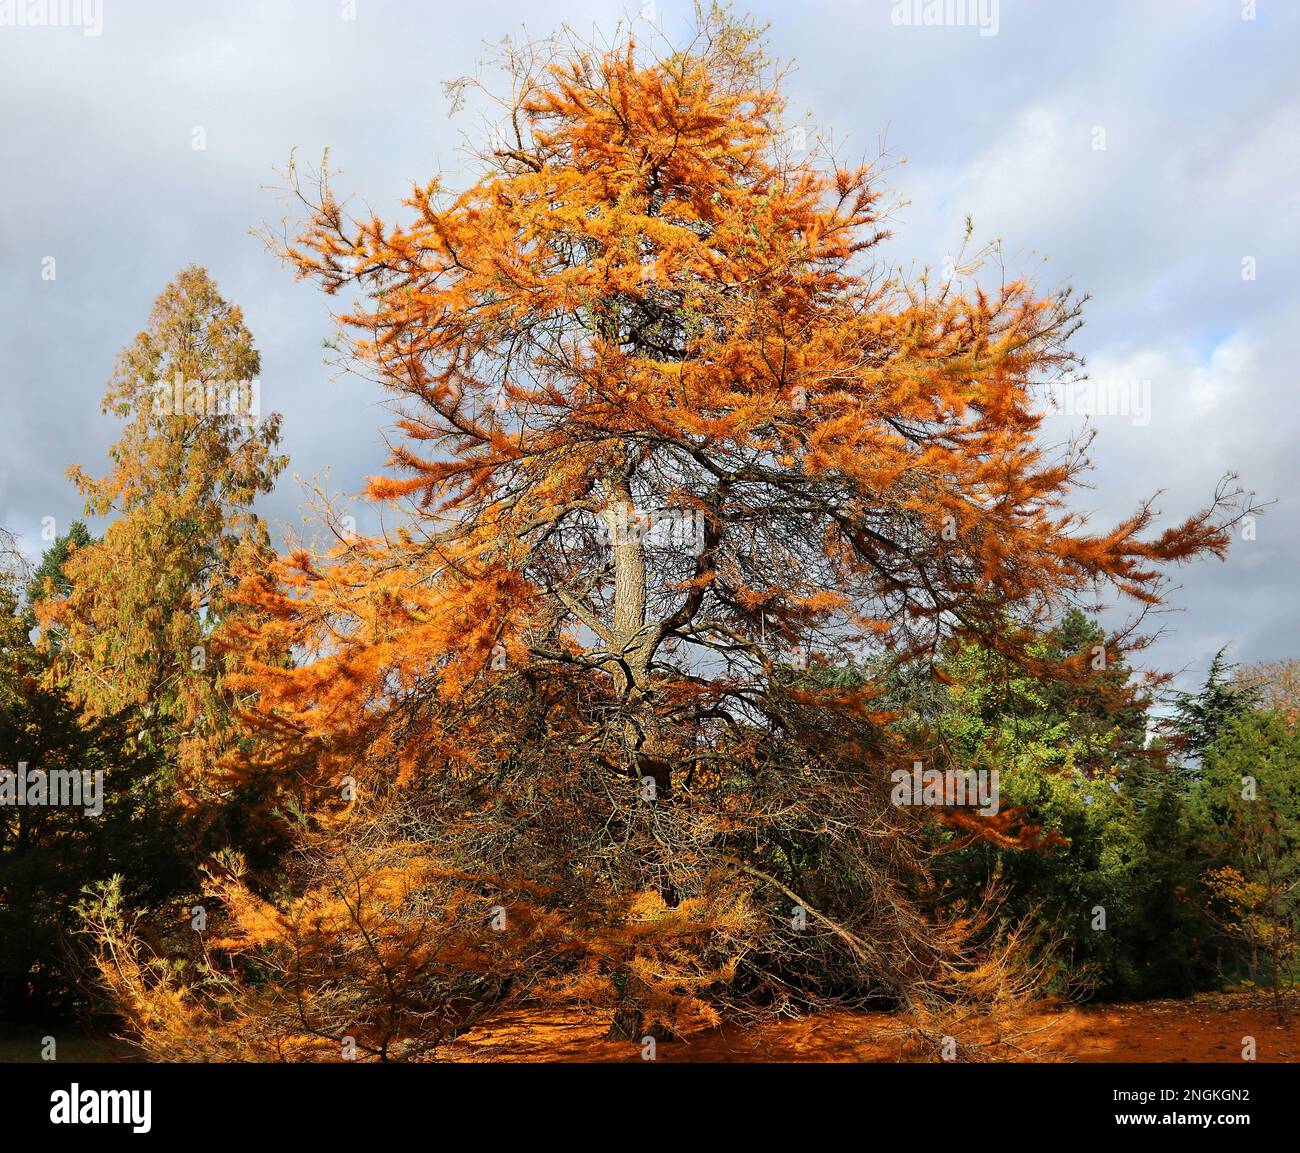 A Golden Larch tree (Pseudolarix amabilis) seen in its autumn (fall) colour against a stormy sky in early November, southern England Stock Photo